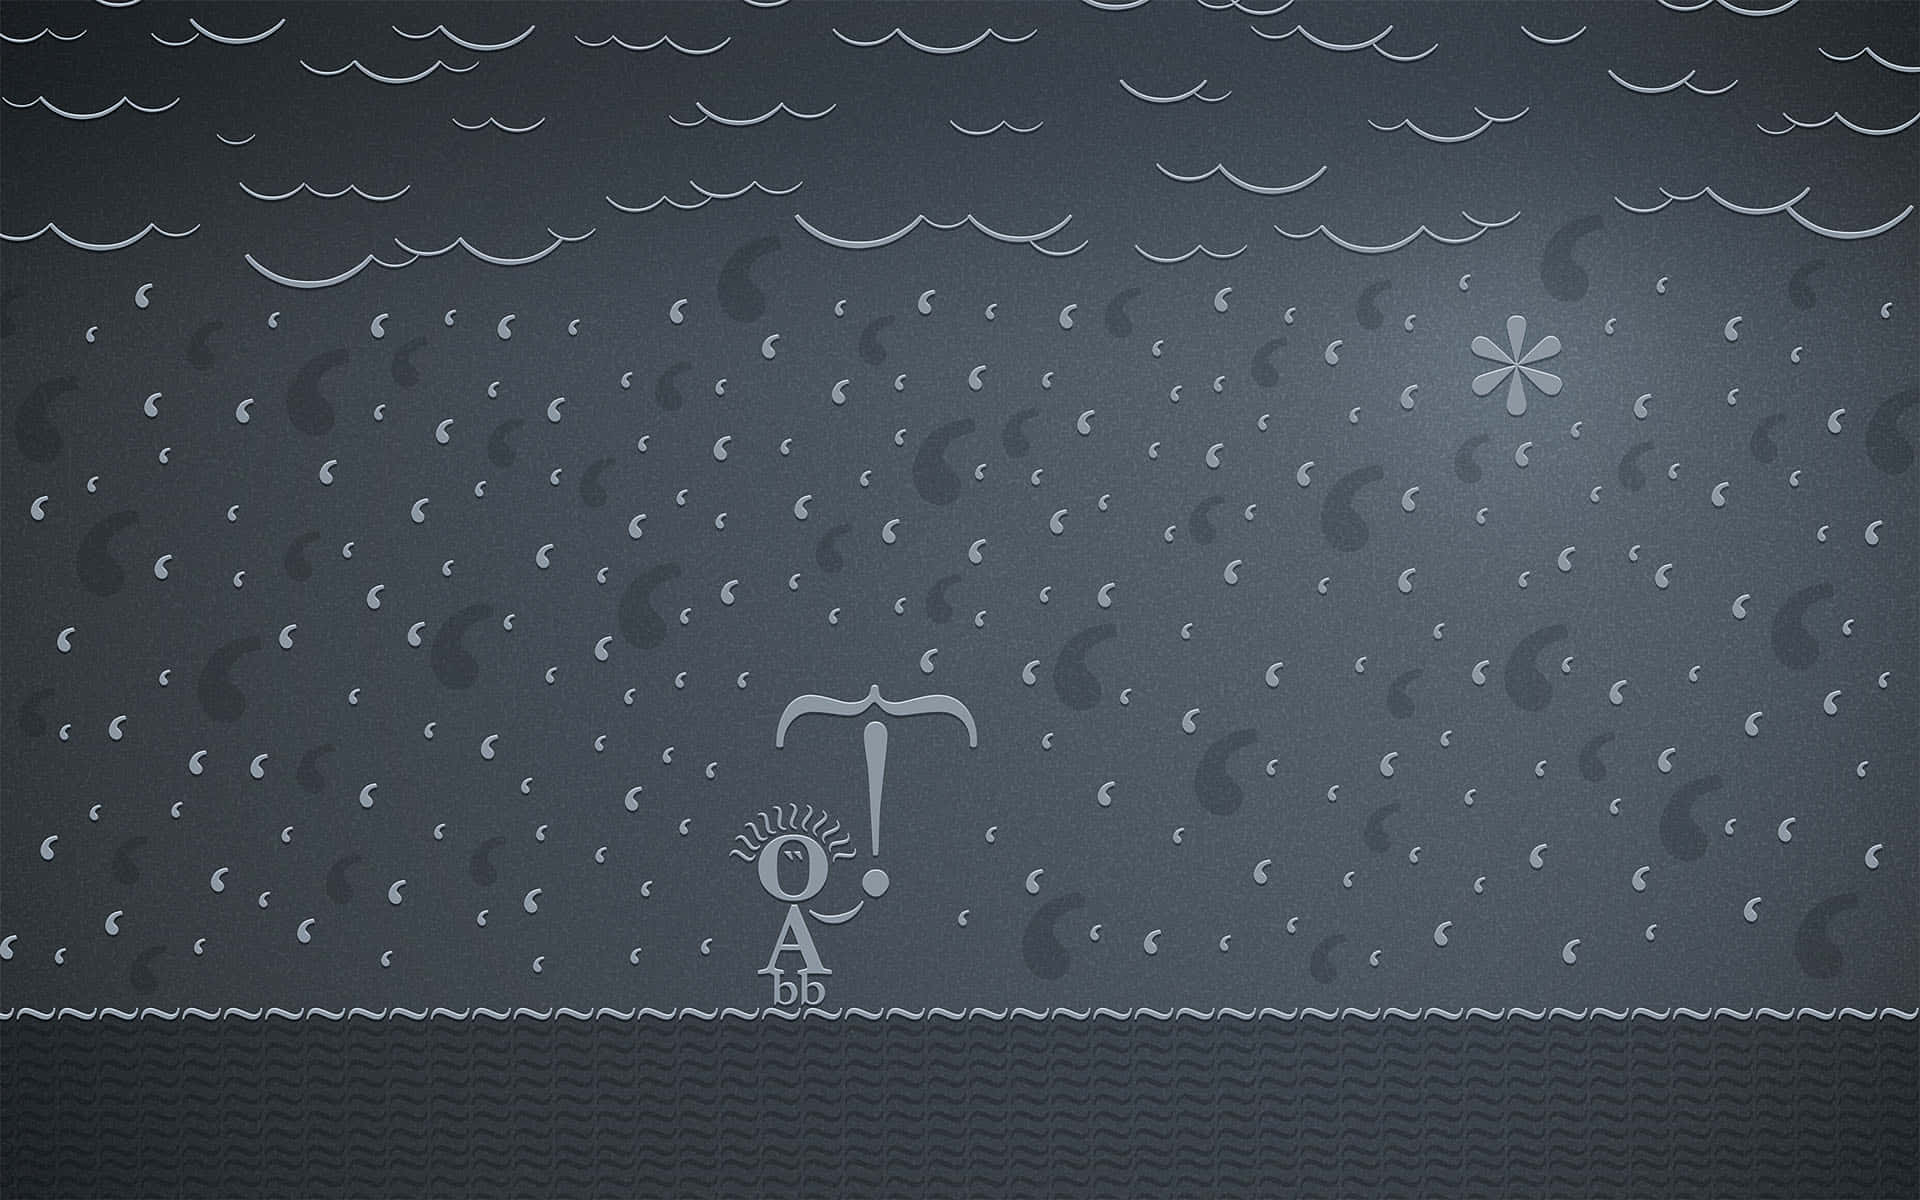 Keyboard Symbols Depicting Rainy Day Picture